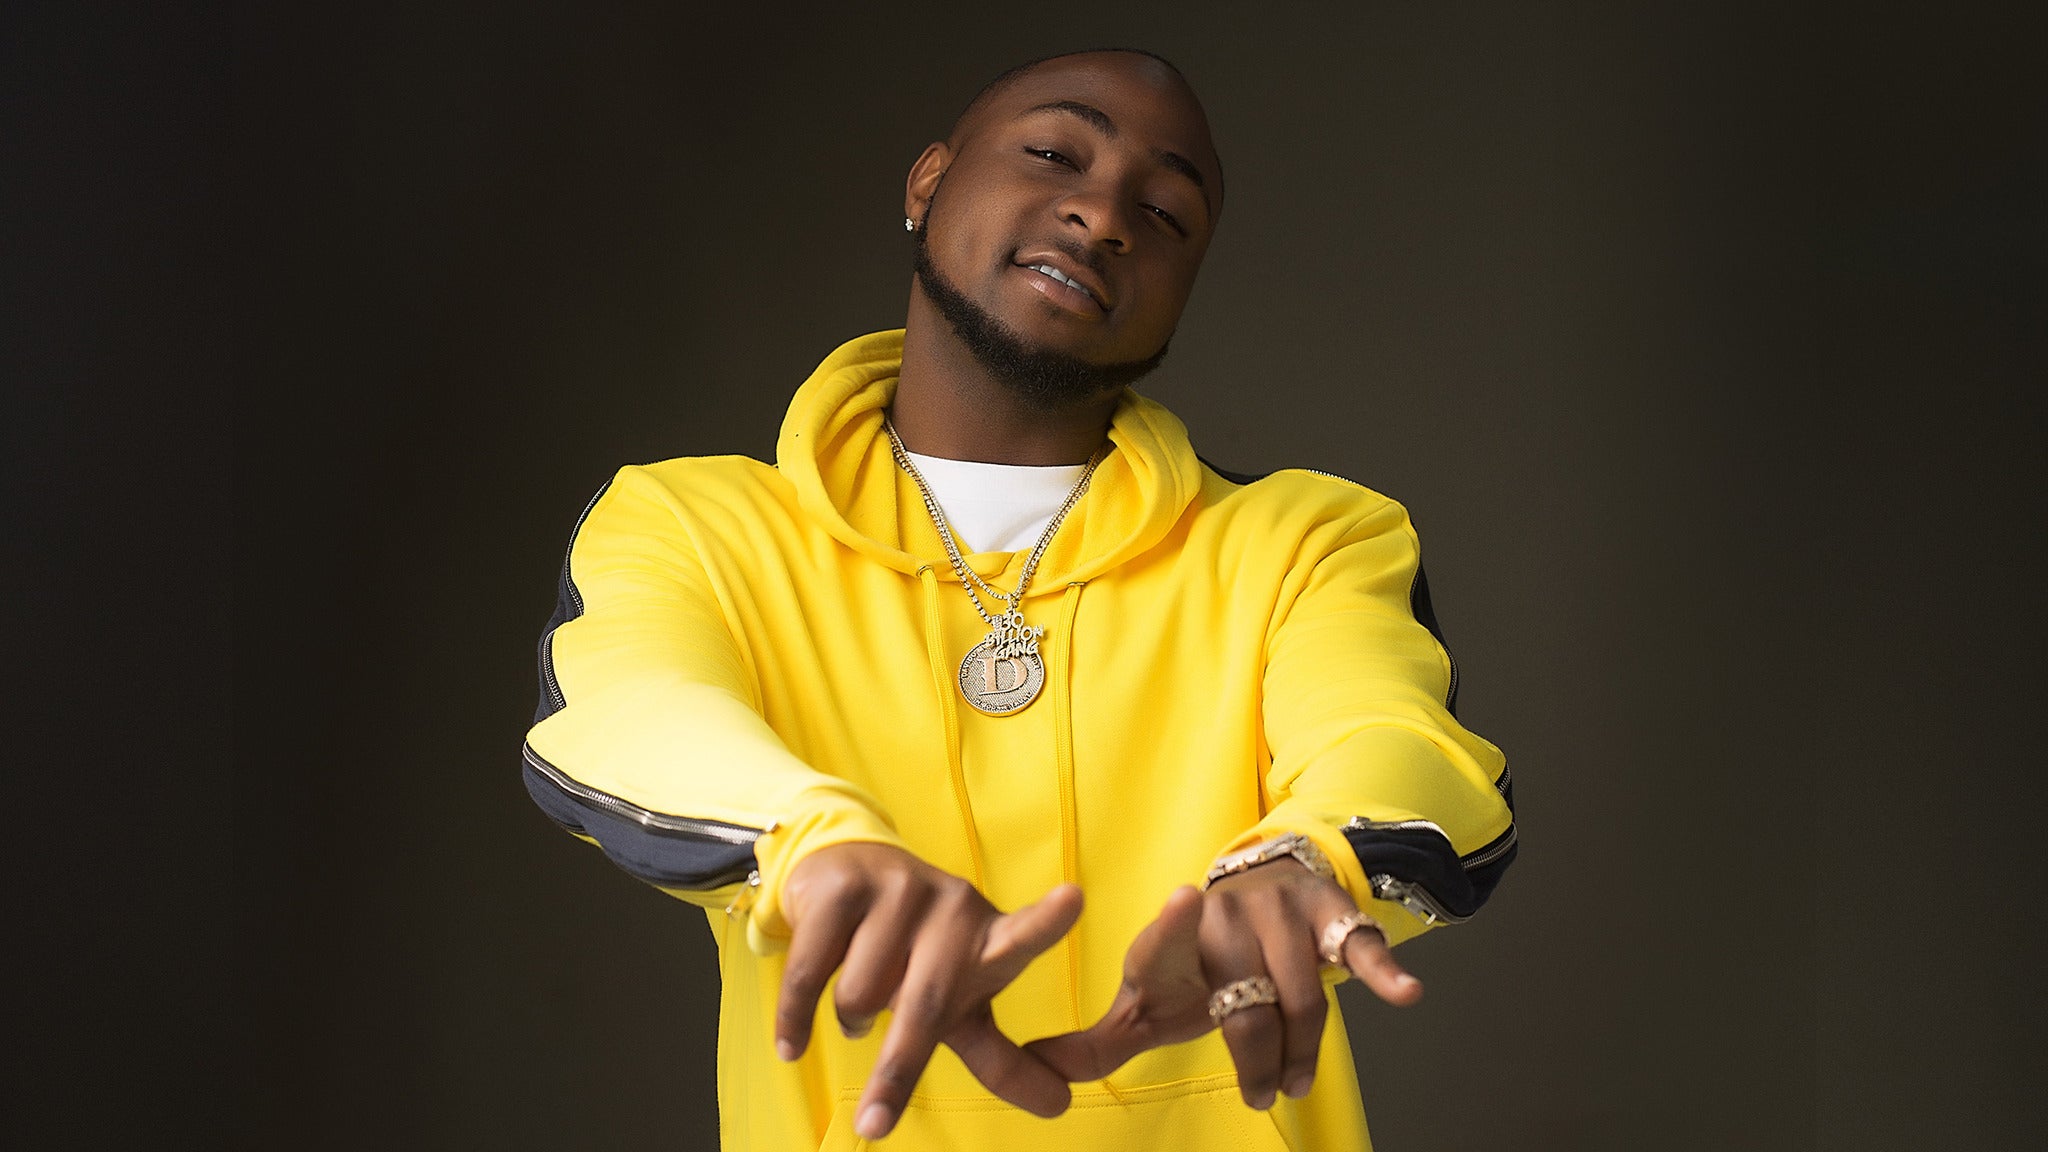 DaVido- A Good Time Tour in Boston promo photo for Official Platinum presale offer code